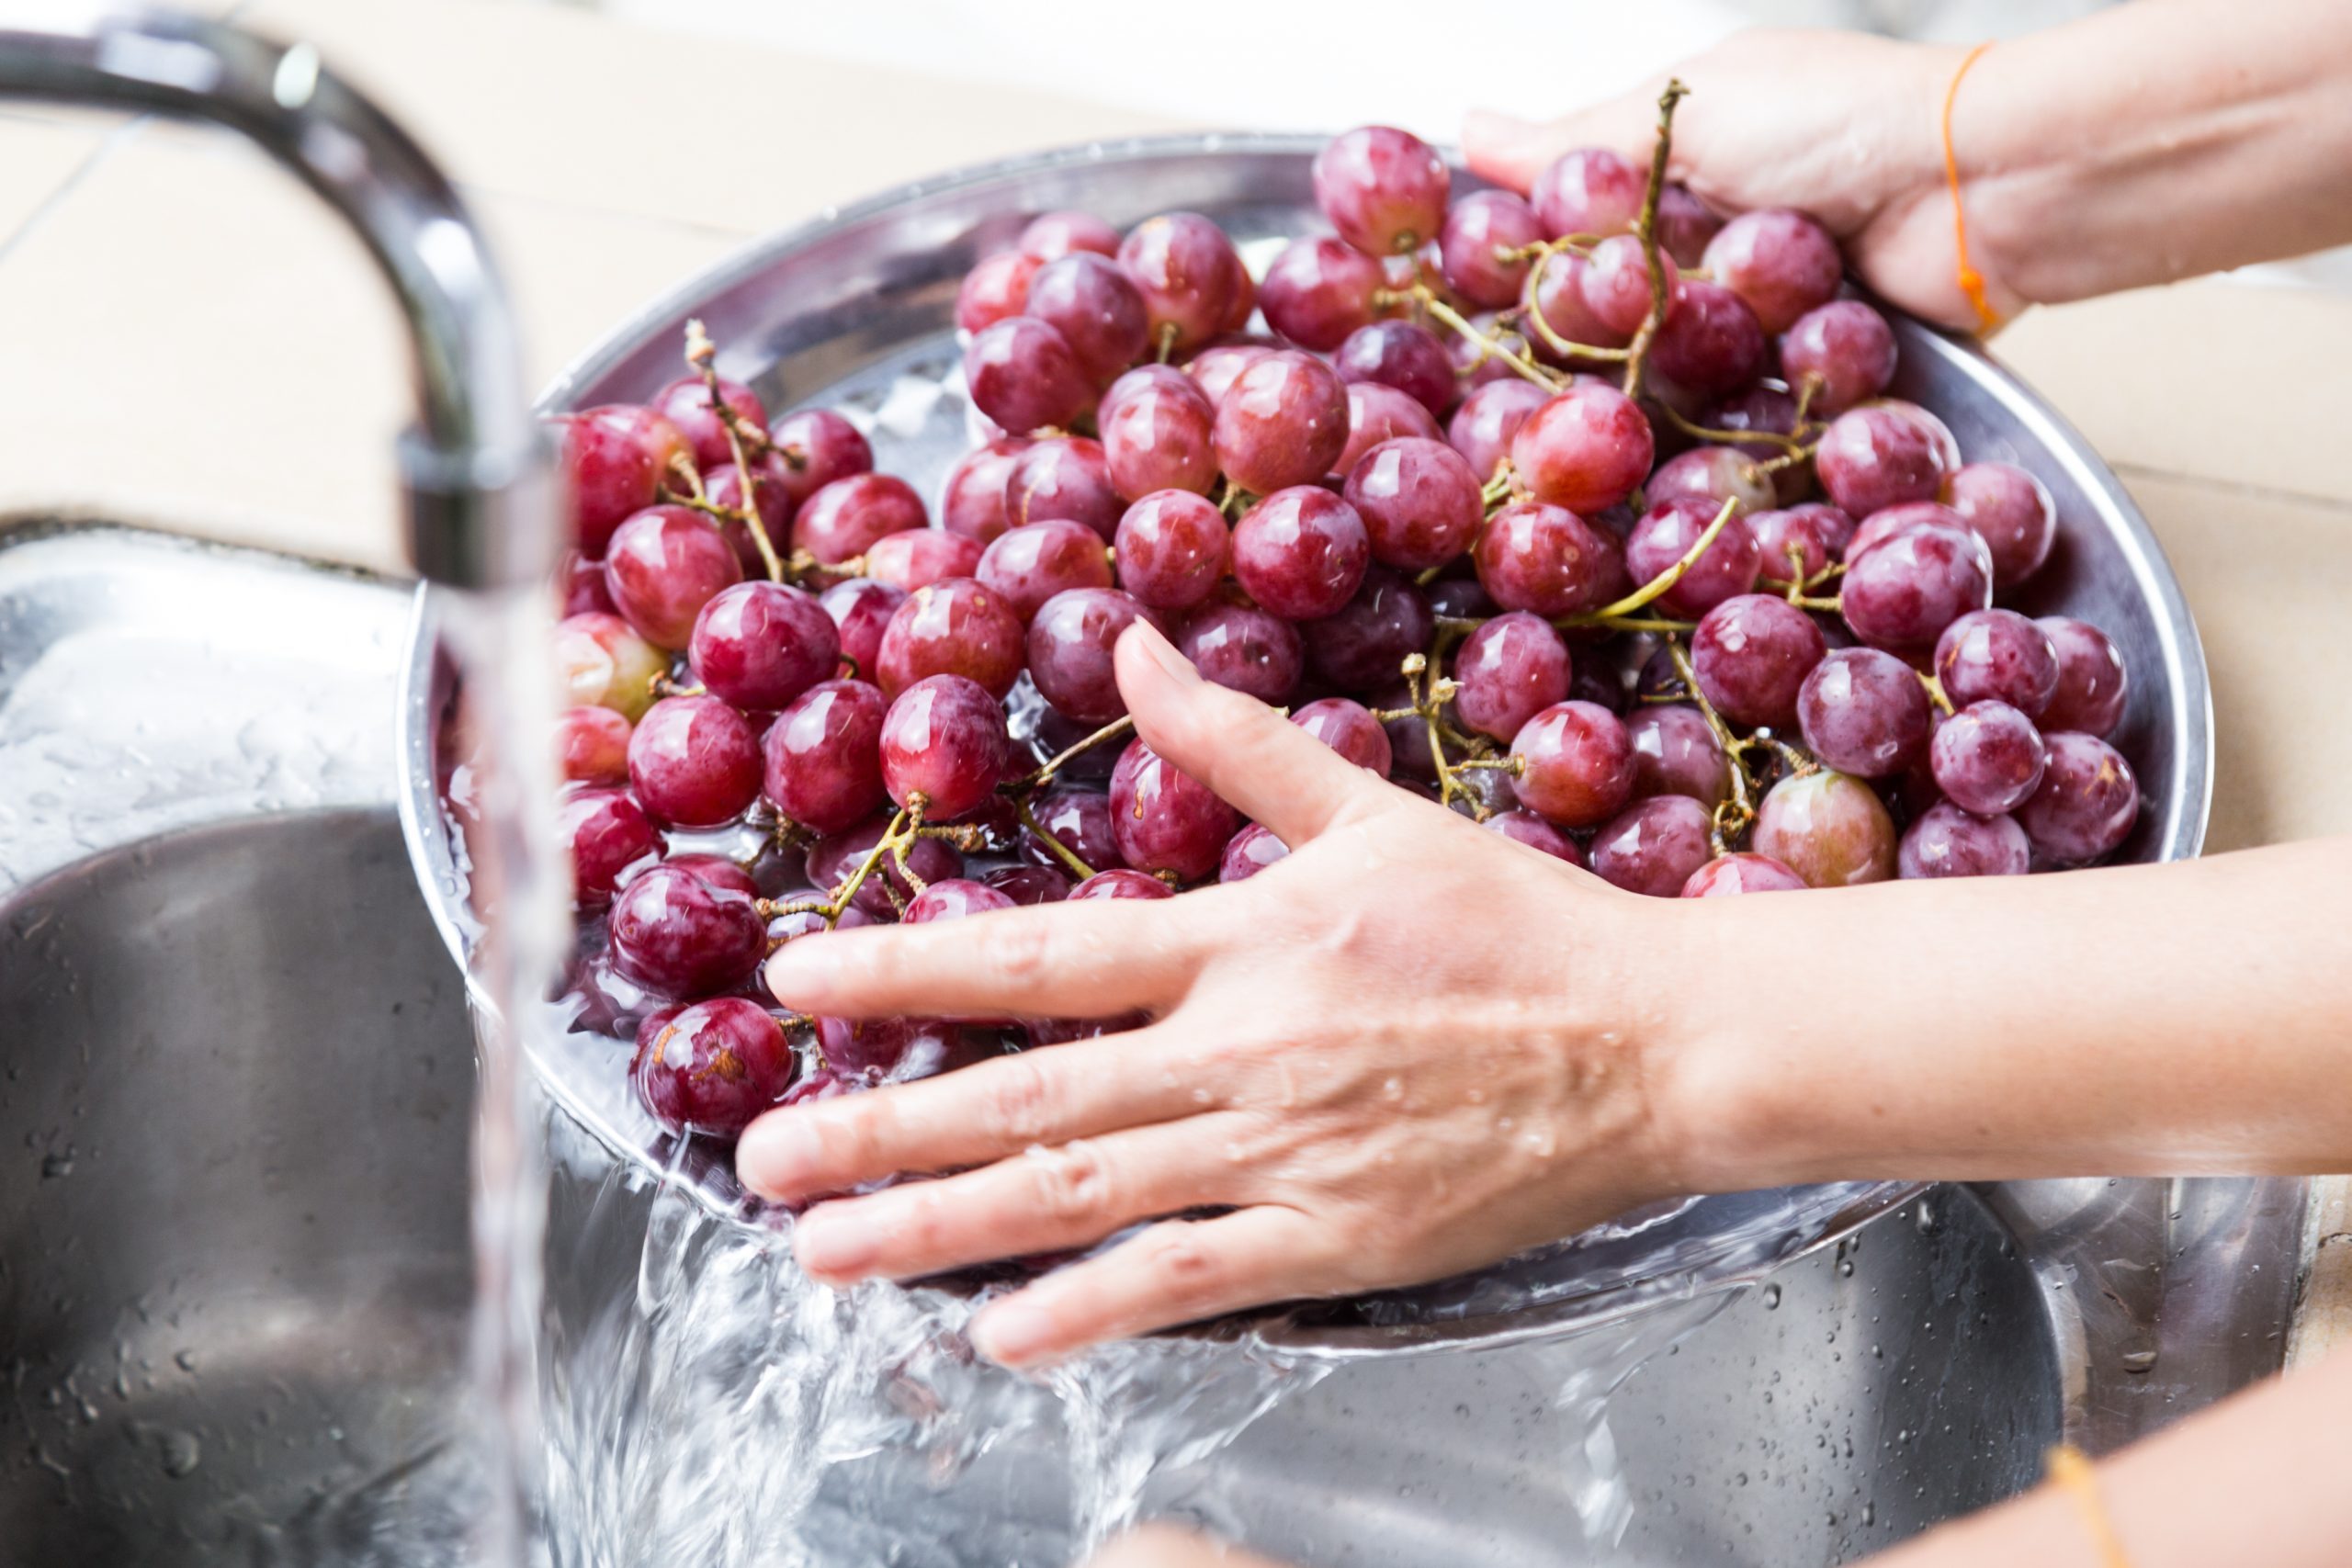 Person's hand washing grapes with running water in household sink